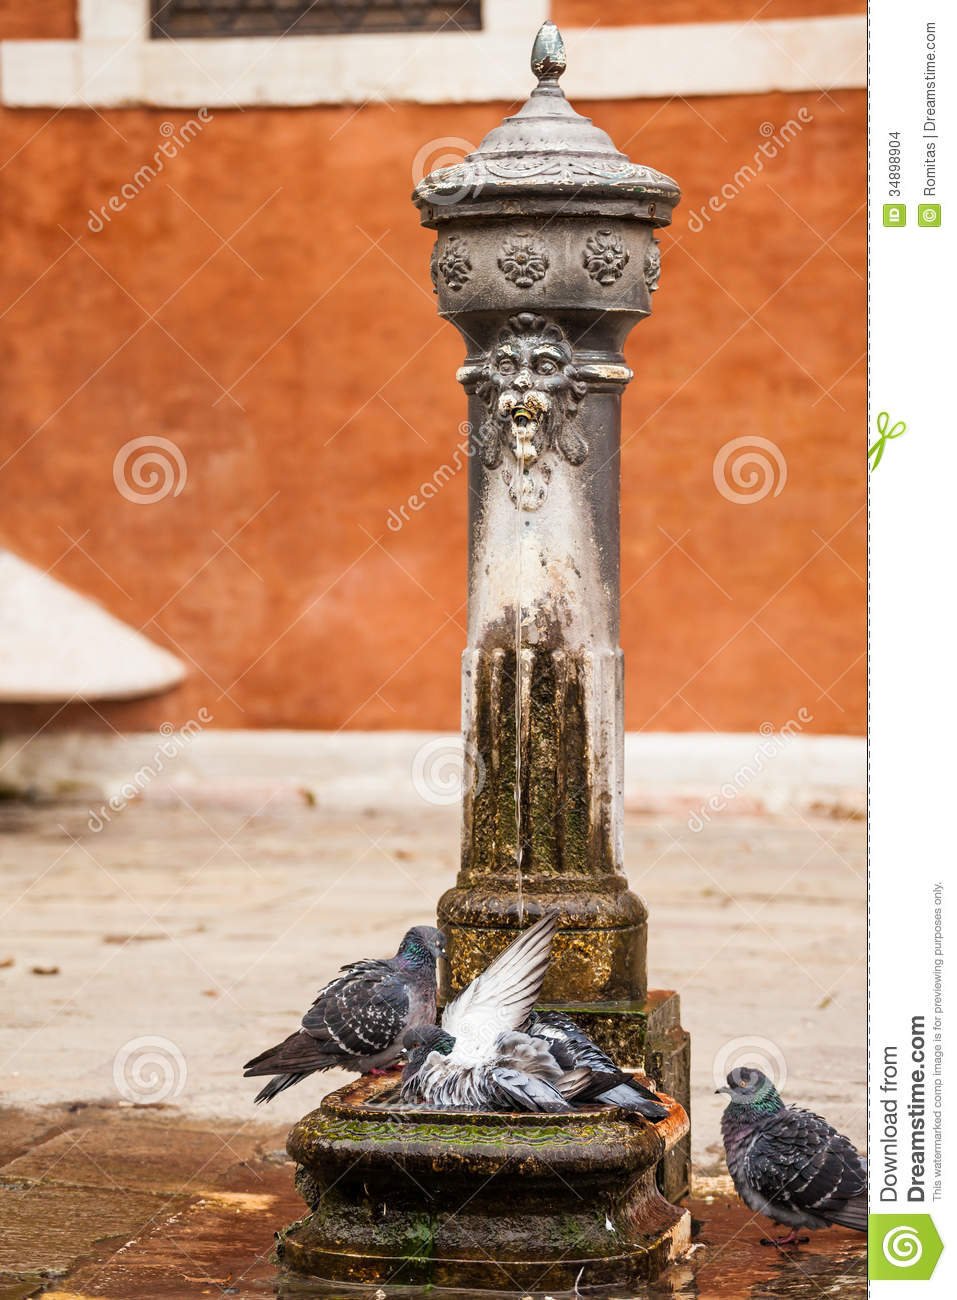 Drinking Water Fountain In Venice Stock Images.